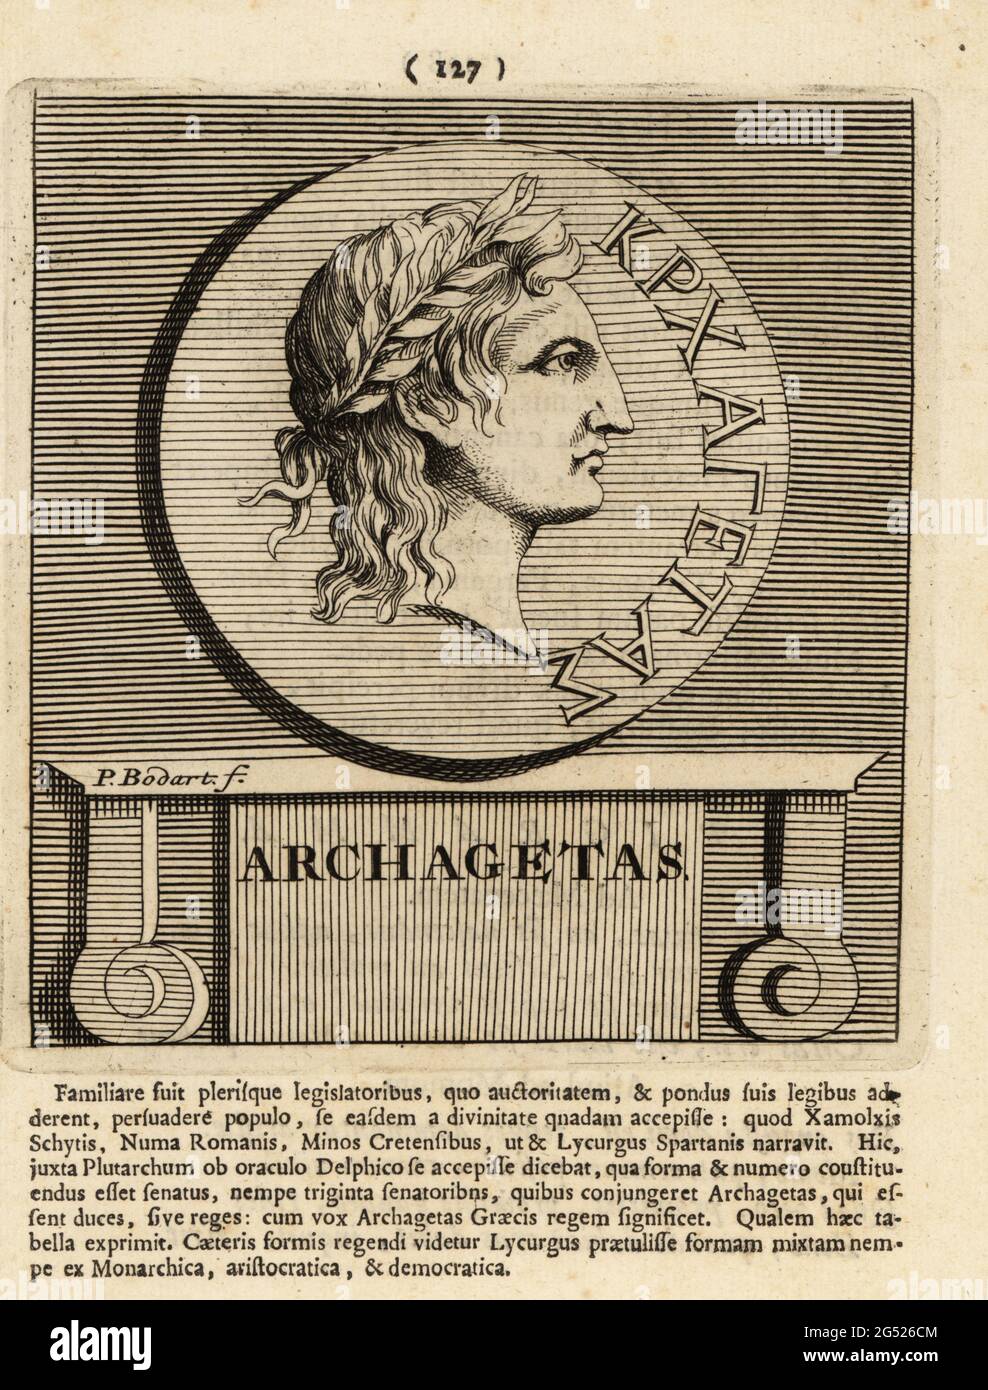 Apollo Archegetes in laurel wreath. An epithet of the Greek god Apollo, god of oracles, healing, archery, music and arts, sunlight, and knowledge, worshipped in several locations including Naxos, Sicily. Archagetas. Copperplate engraving by Pieter Bodart (1676-1712) from Henricus Spoor’s Deorum et Heroum, Virorum et Mulierum Illustrium Imagines Antiquae Illustatae, Gods and Heroes, Men and Women, Illustrated with Antique Images, Petrum, Amsterdam, 1715. First published as Favissæ utriusque antiquitatis tam Romanæ quam Græcæ in 1707. Henricus Spoor was a Dutch physician, classical scholar, poet Stock Photo